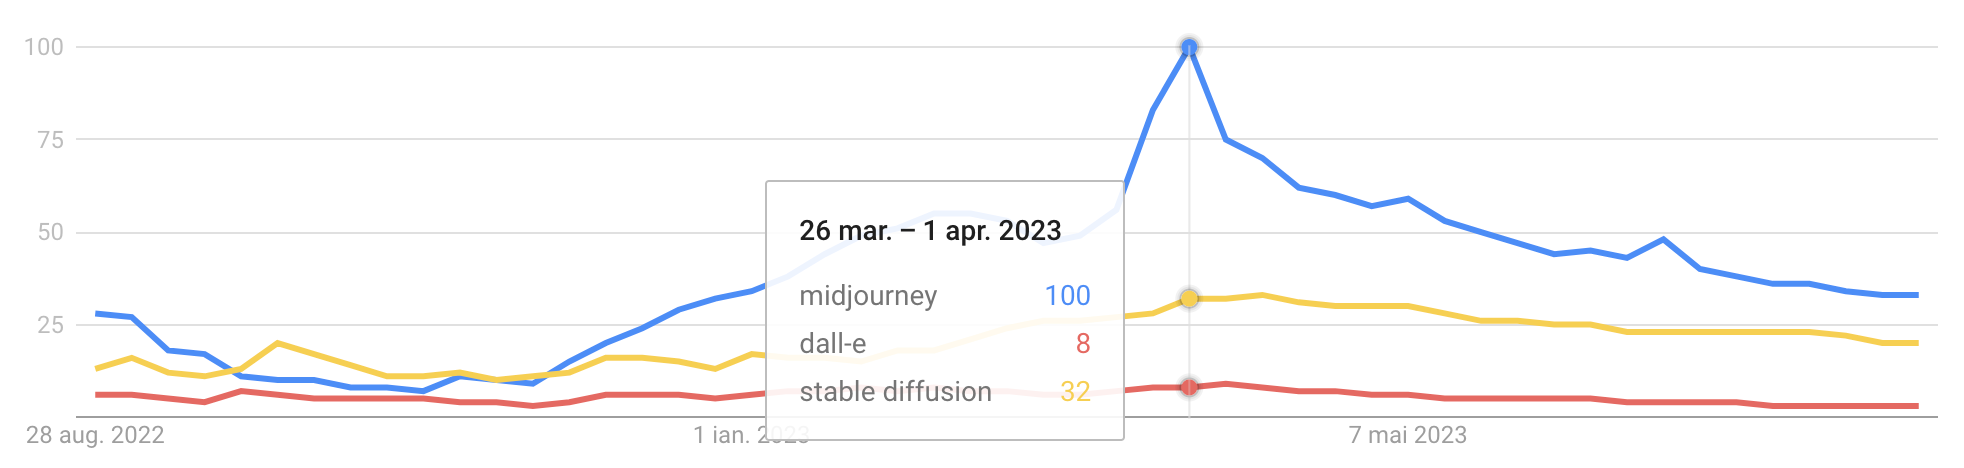 14 Million Users and Growing: Midjourney's Statistical Success Story Unveiled